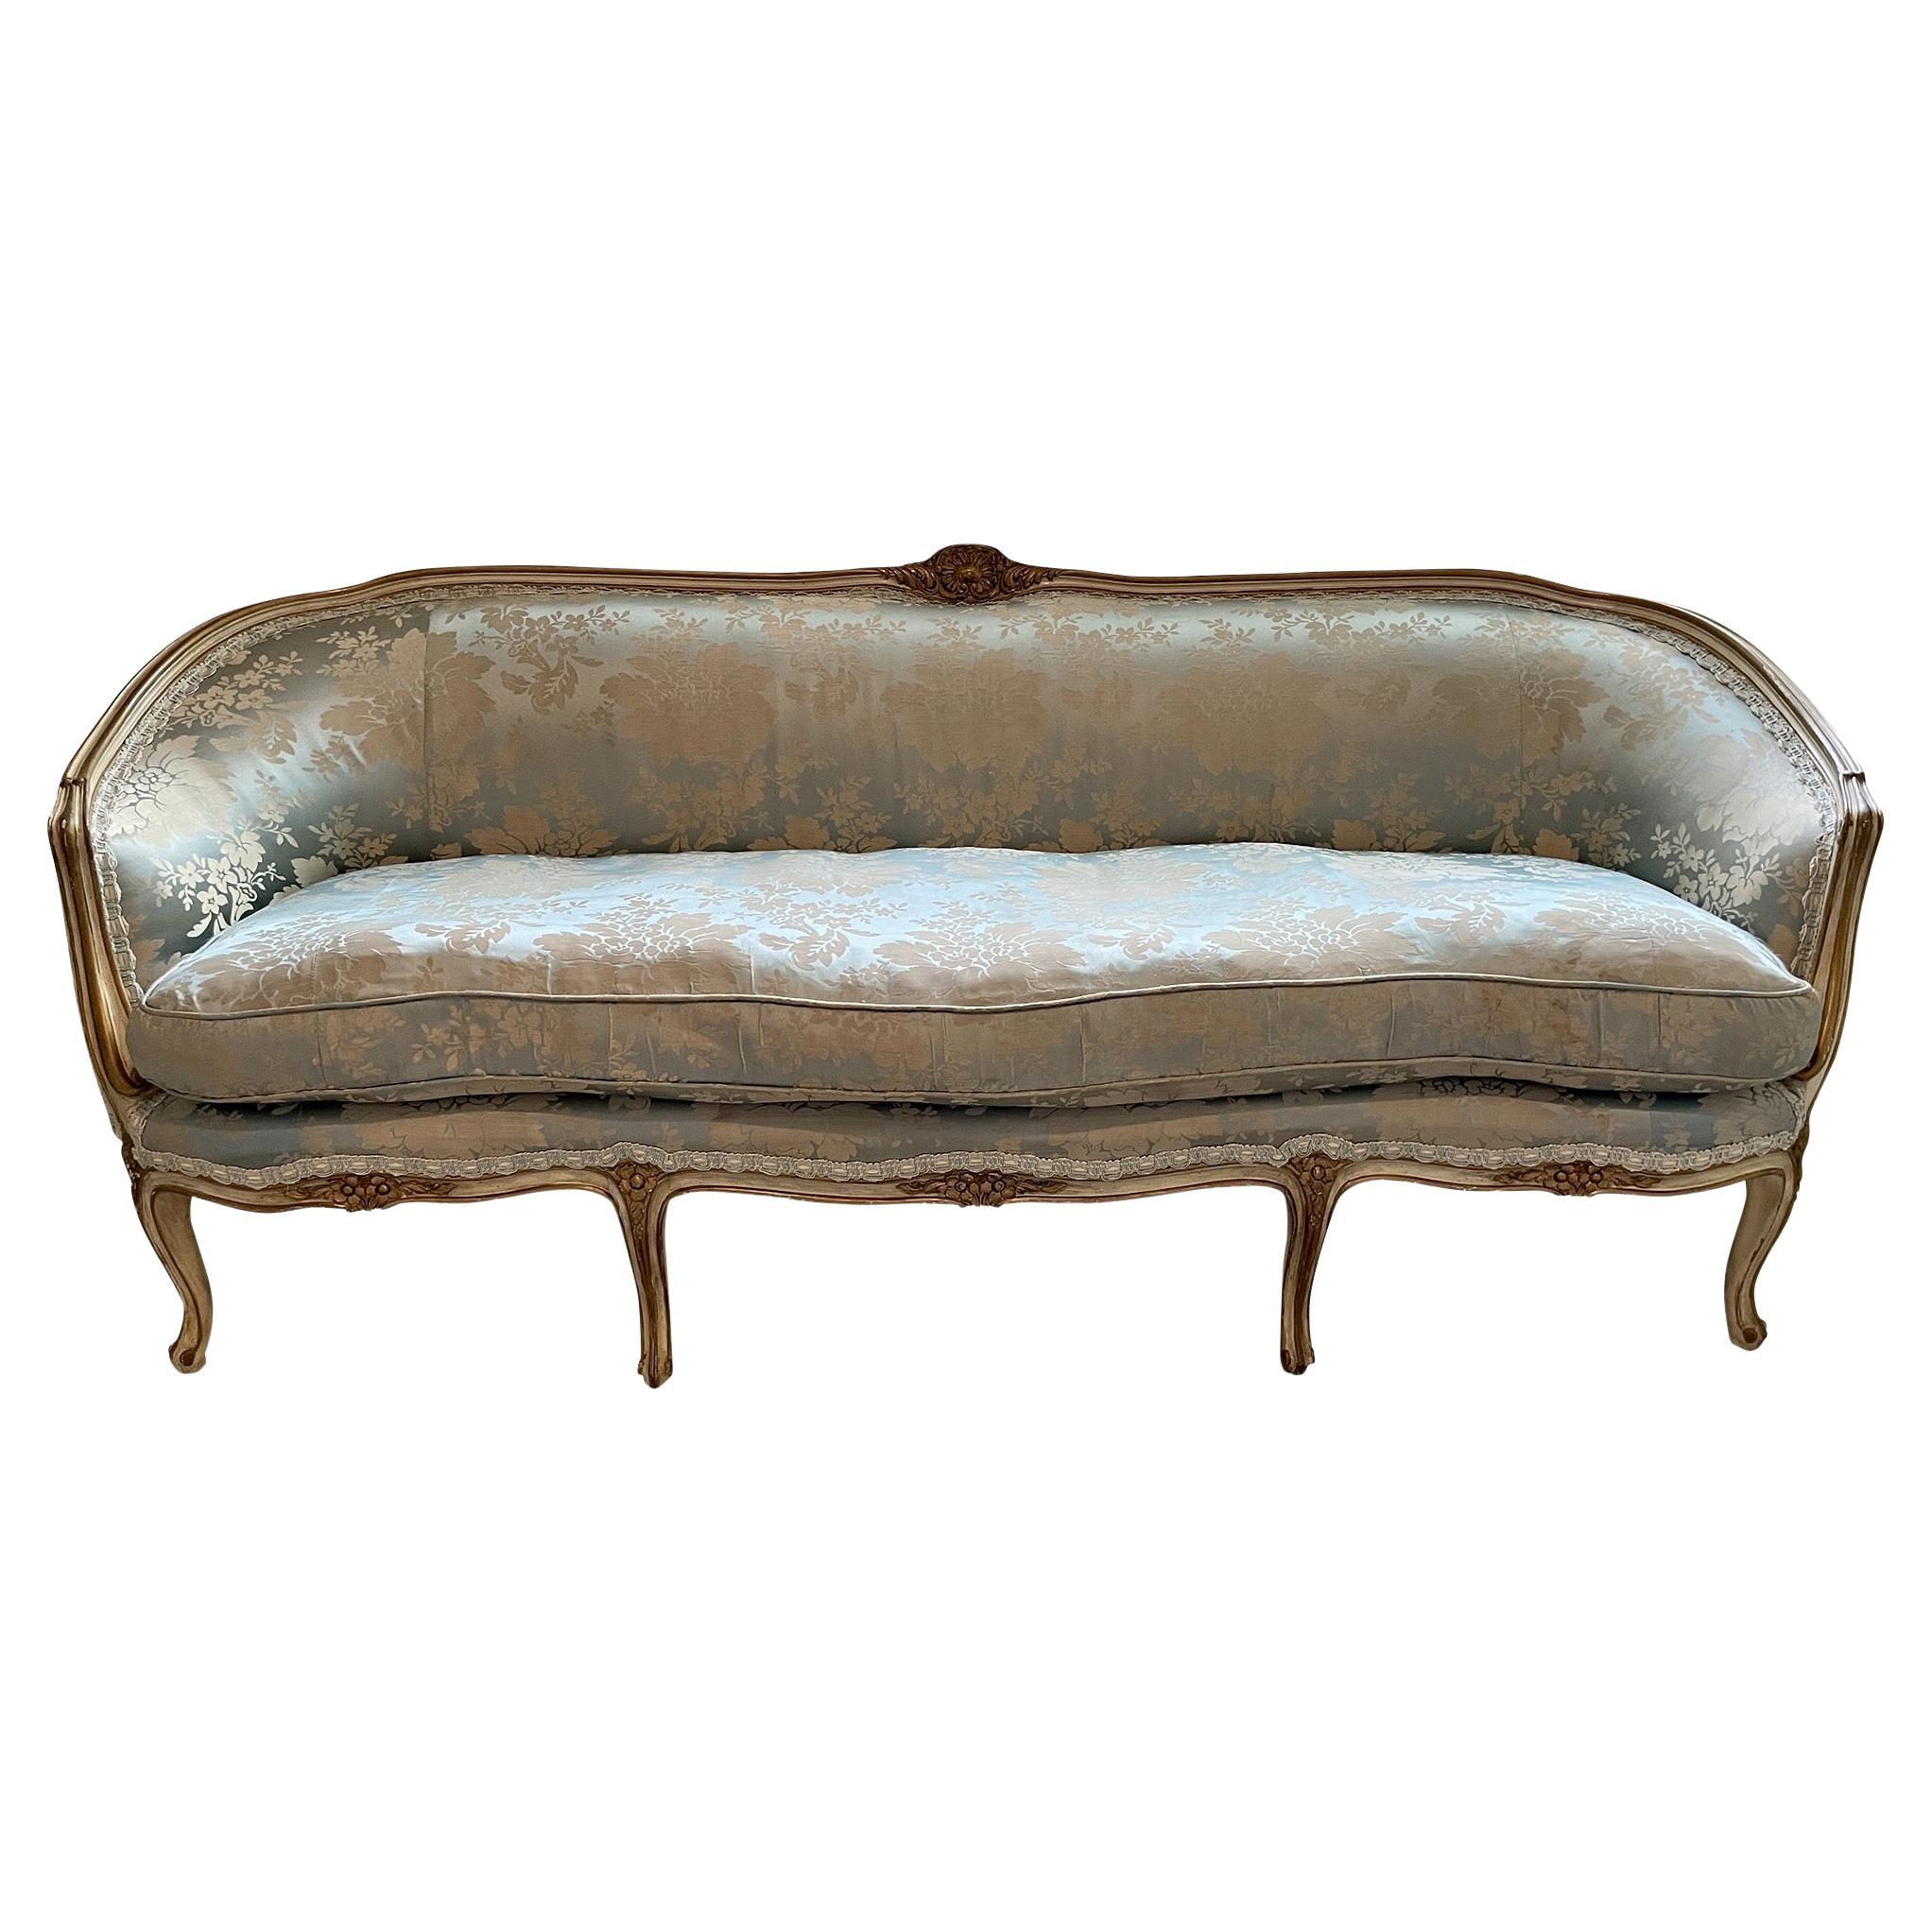 French Louis XV Style Sofa Down Filled in Blue Silk Damask